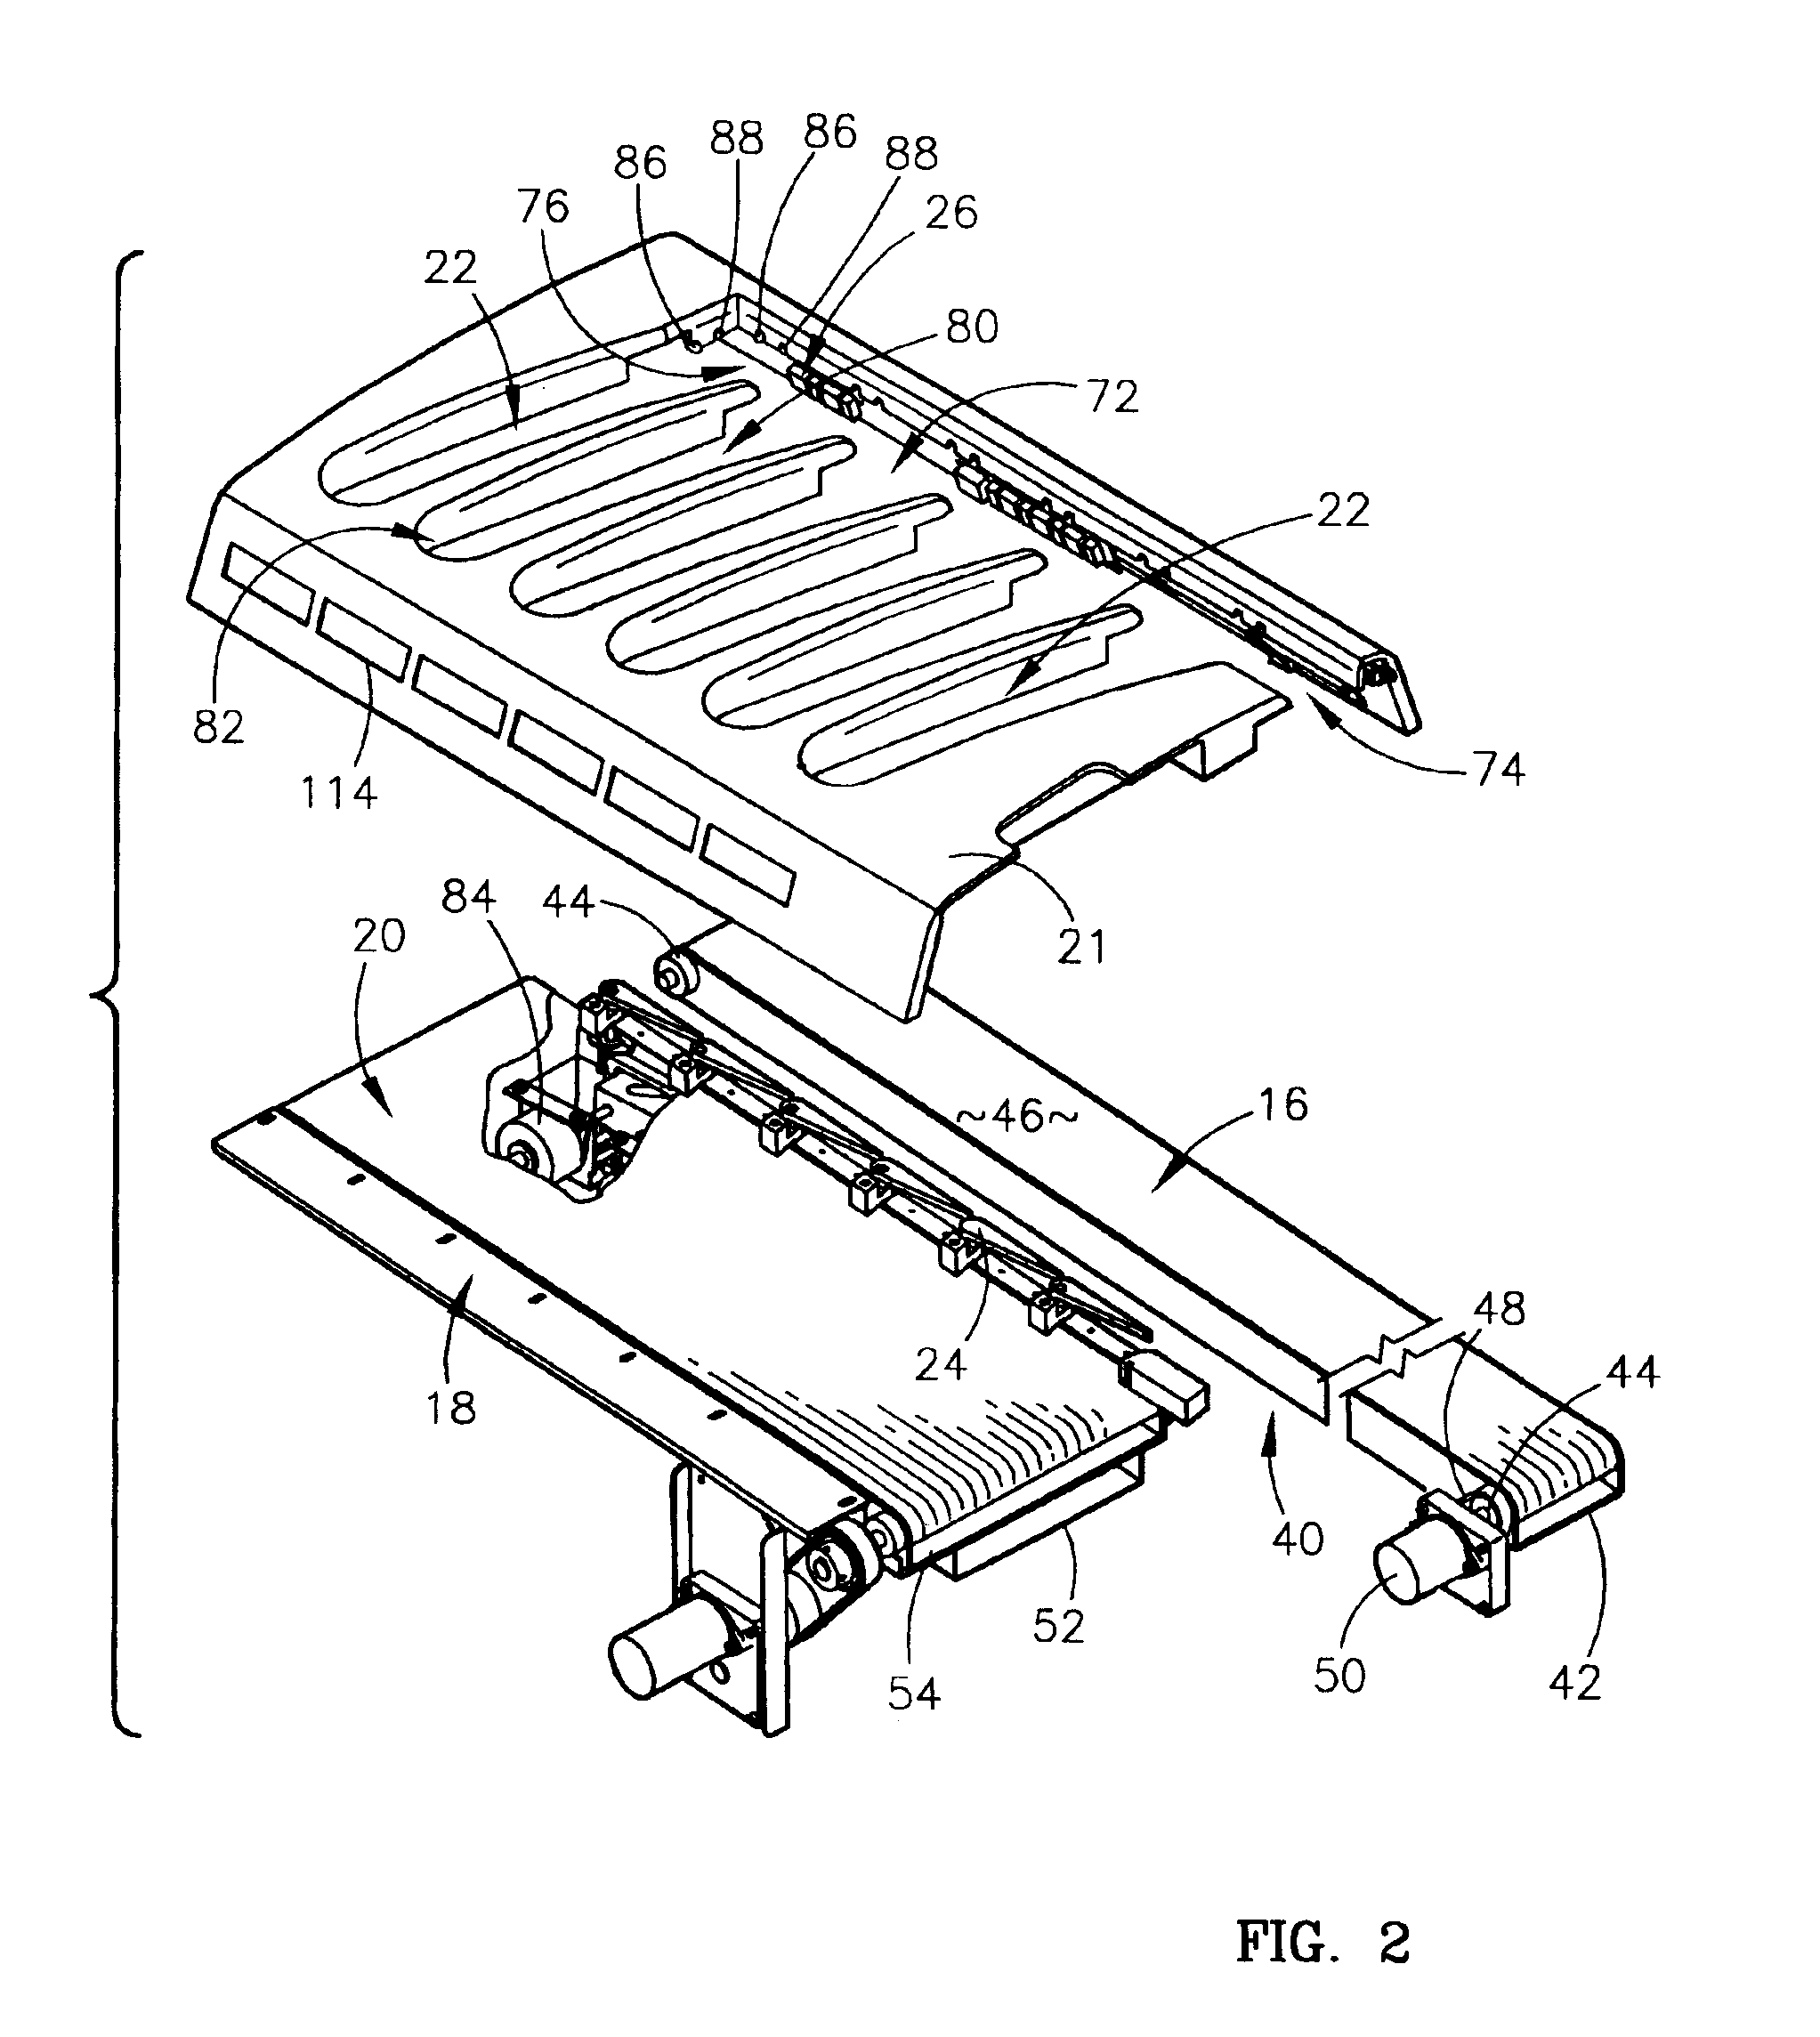 Collating unit for use with a control center cooperating with an automatic prescription or pharmaceutical dispensing system